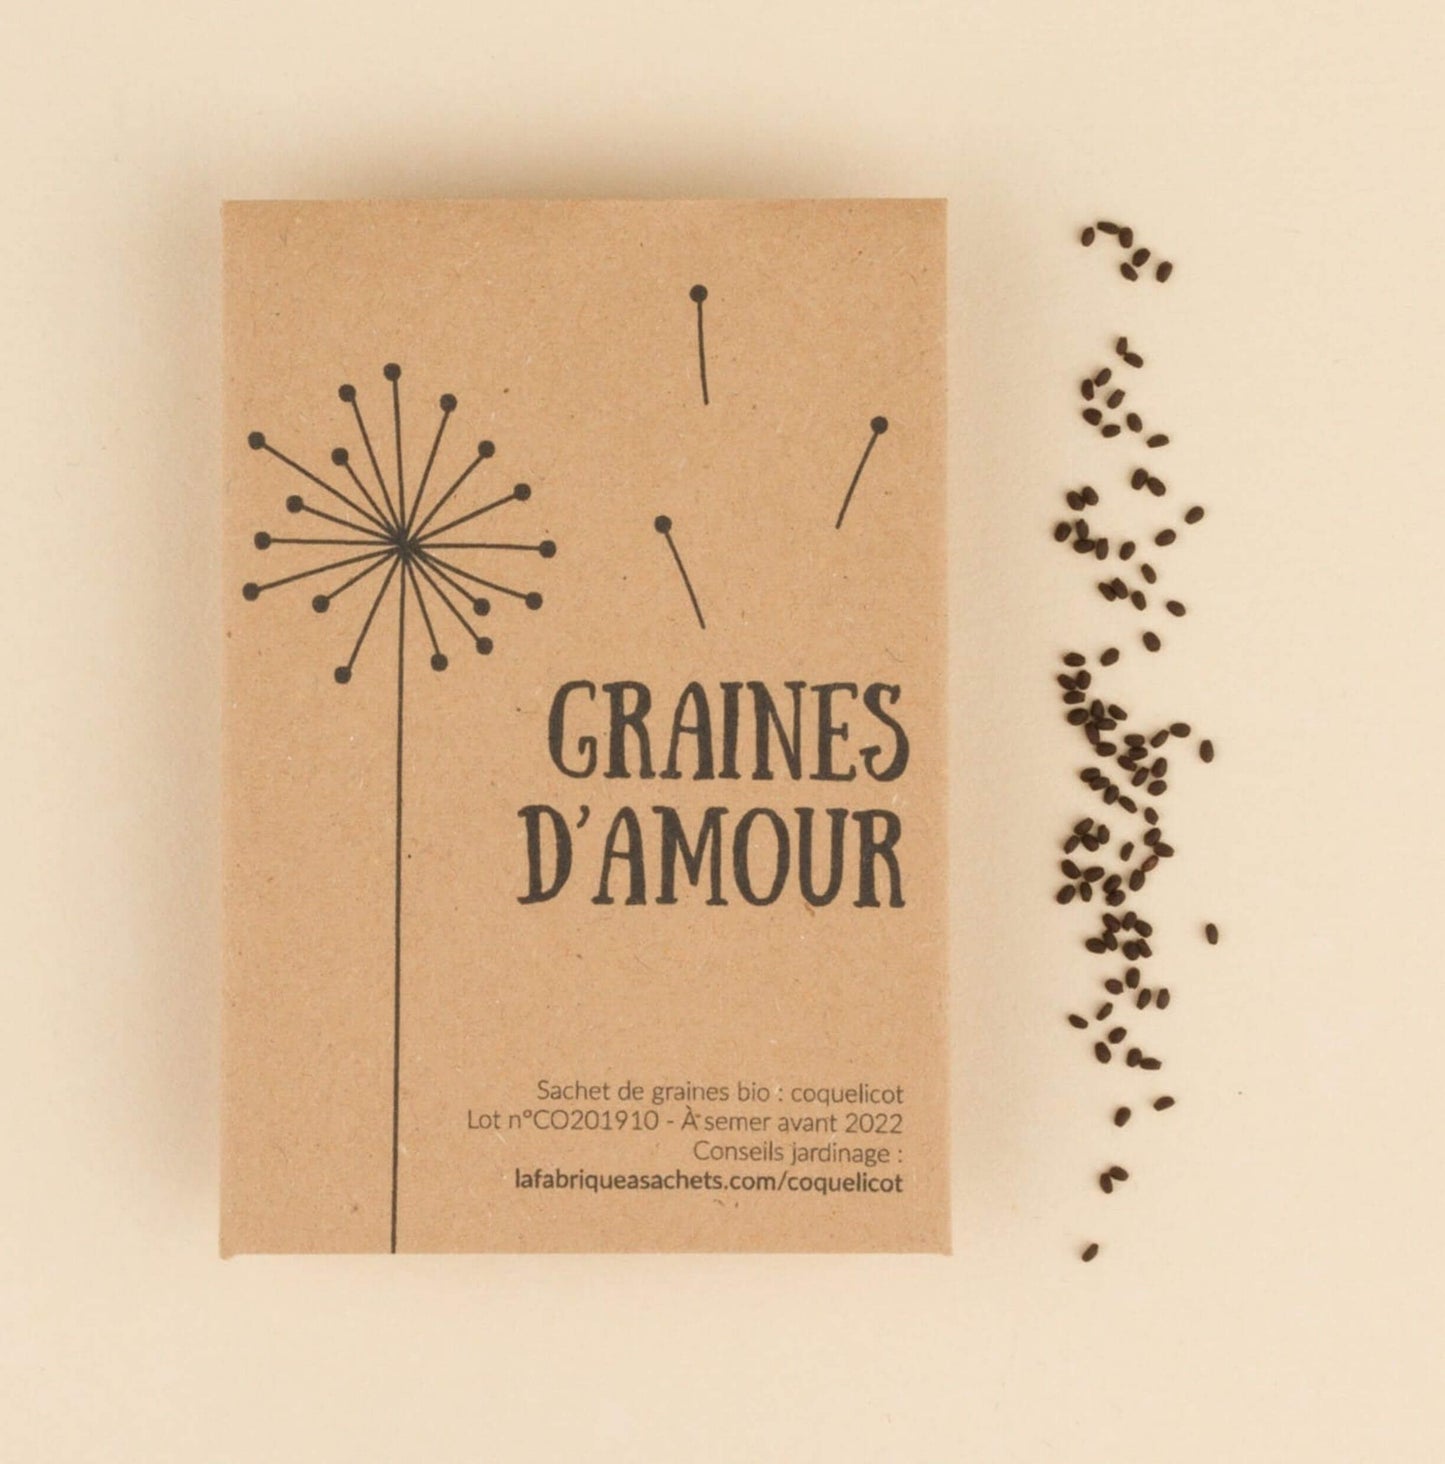 Graines d'amour - seed bag wish card - Unik by Nature